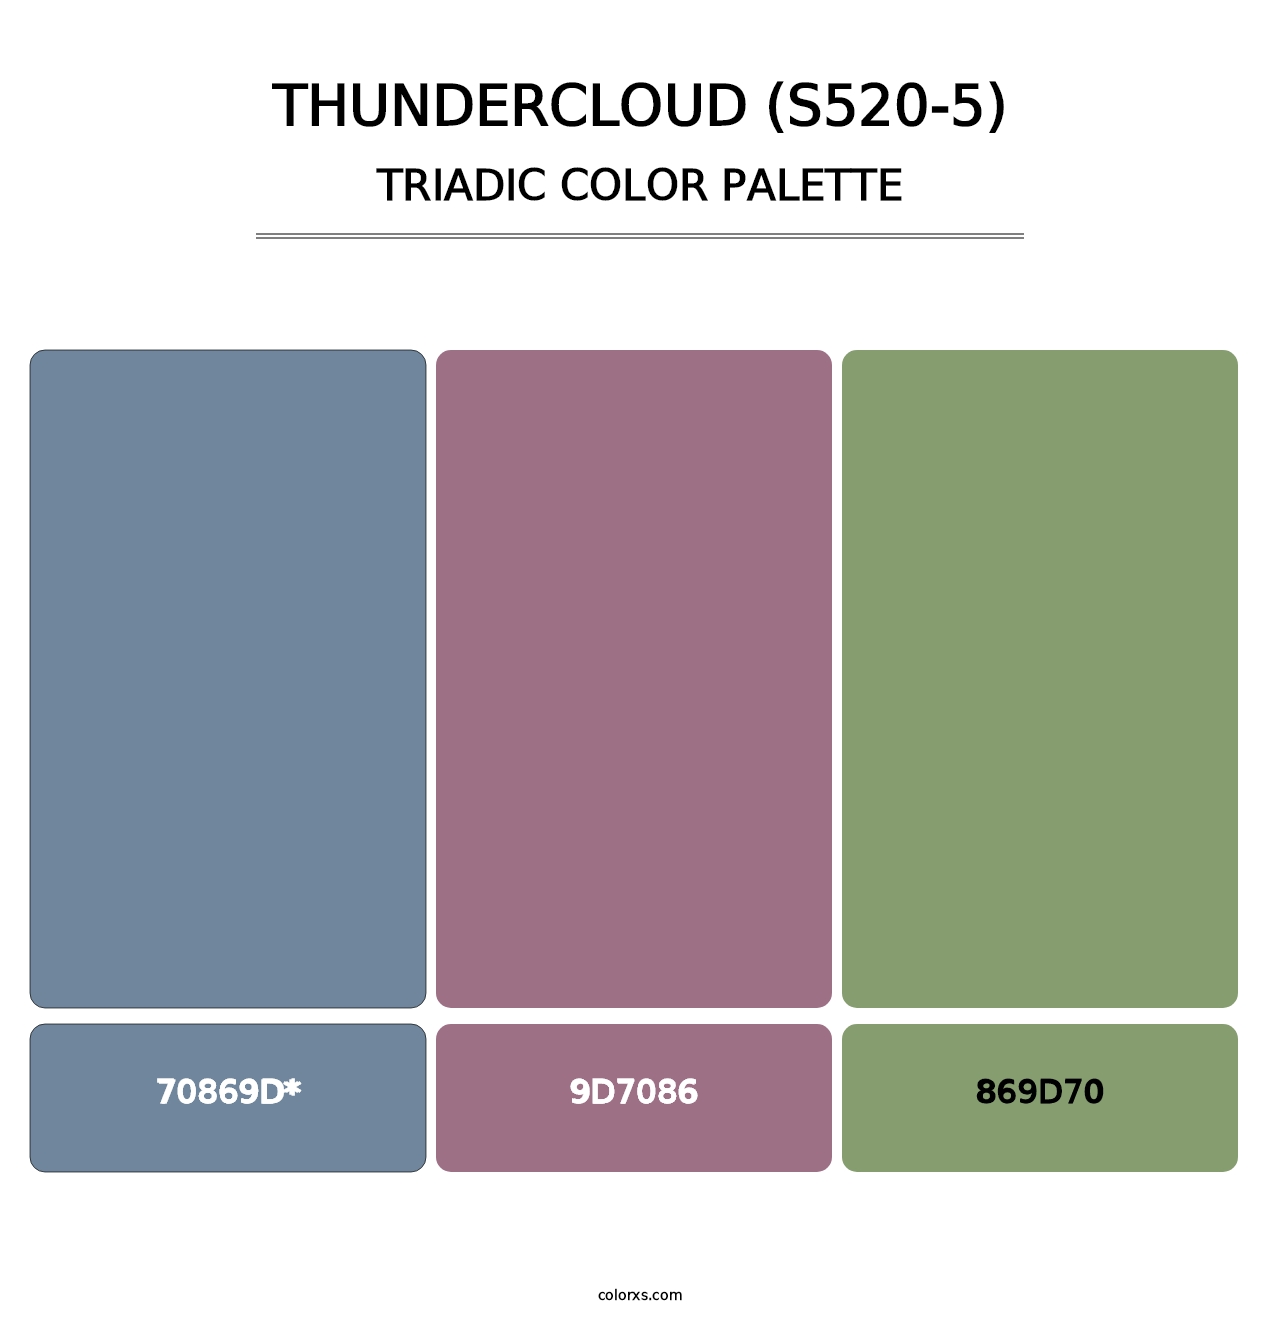 Thundercloud (S520-5) - Triadic Color Palette